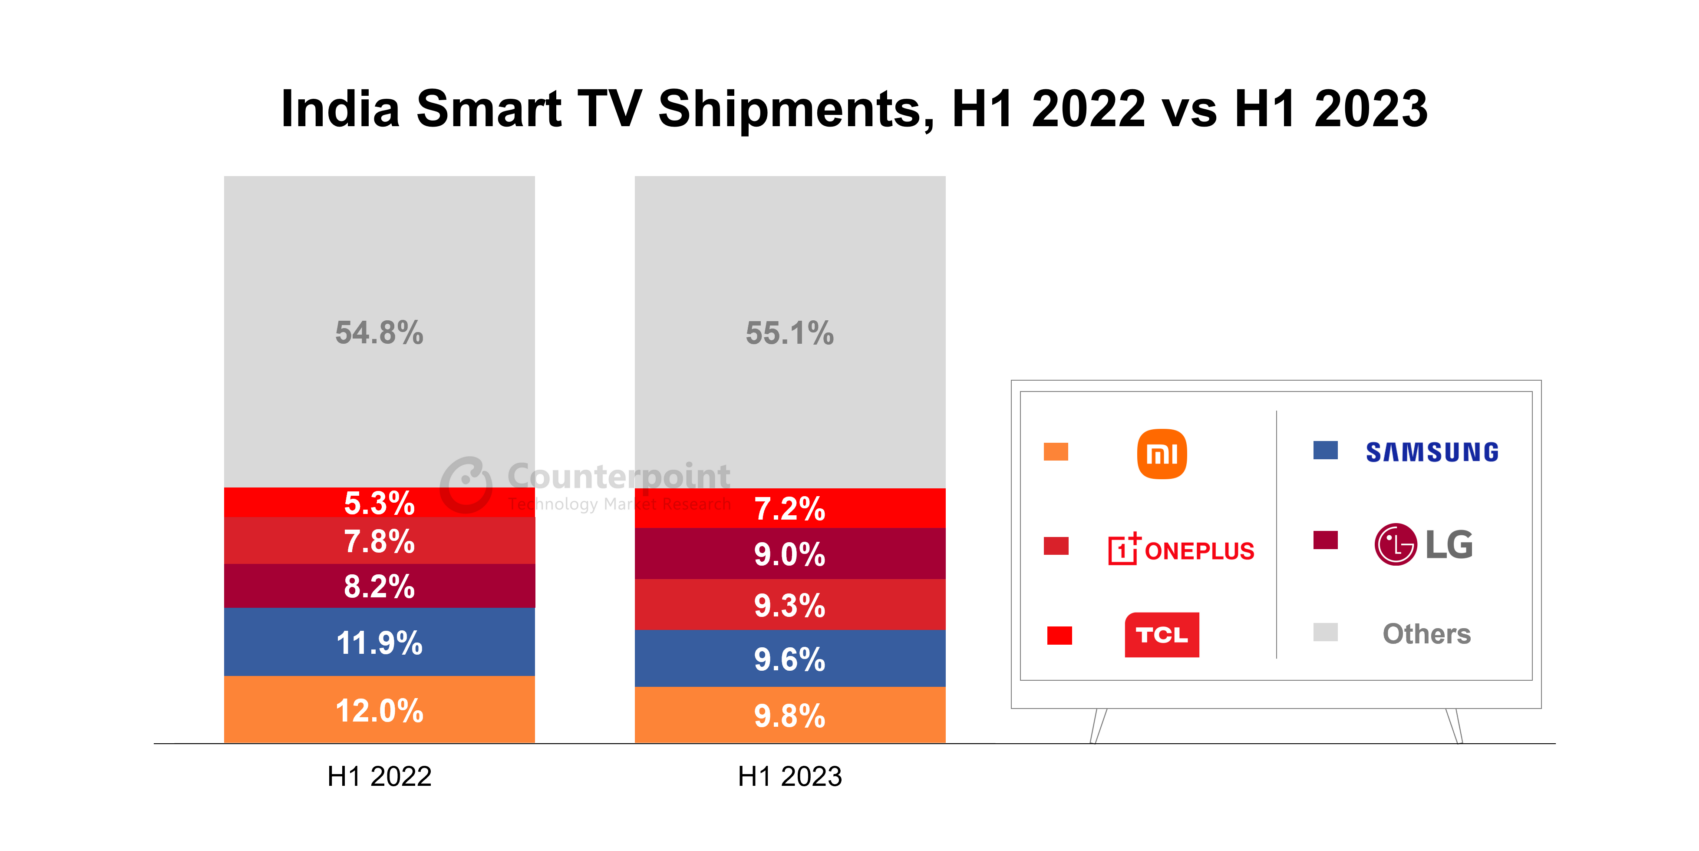 A chart showing different smart TV brands' share in smart TV shipments in H1 2022 vs H1 2023